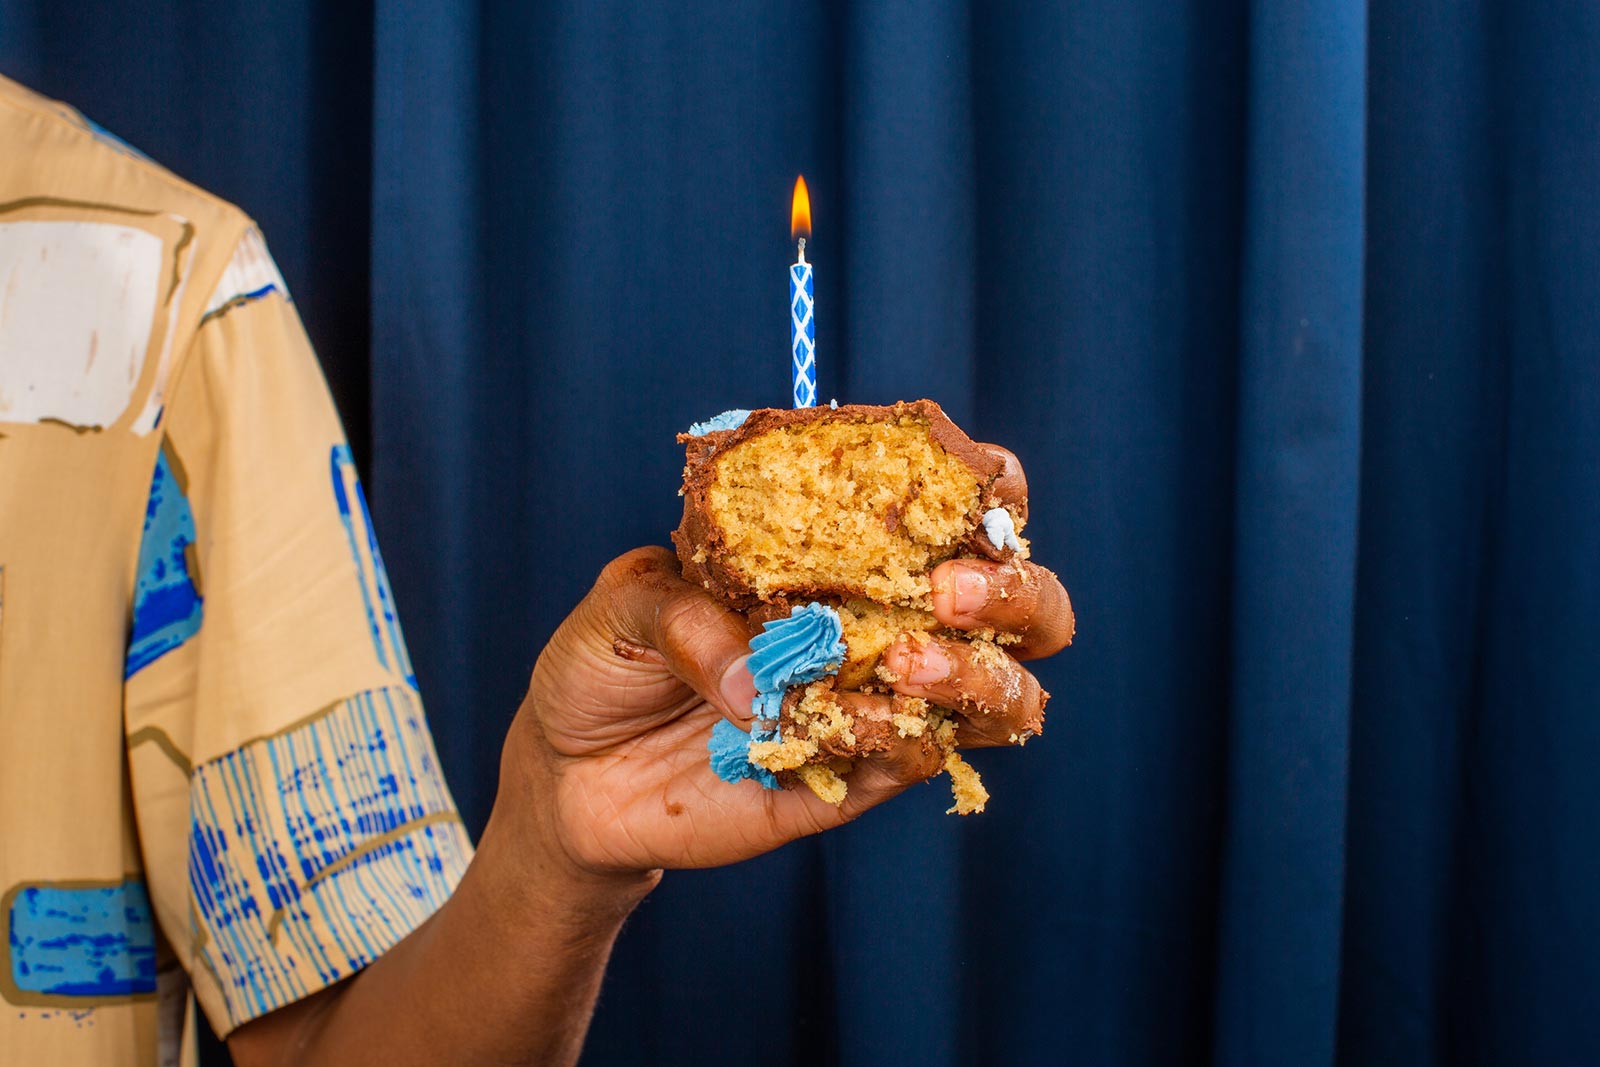 Have your cake and eat it, too, by using these marketing tips from Donald Miller